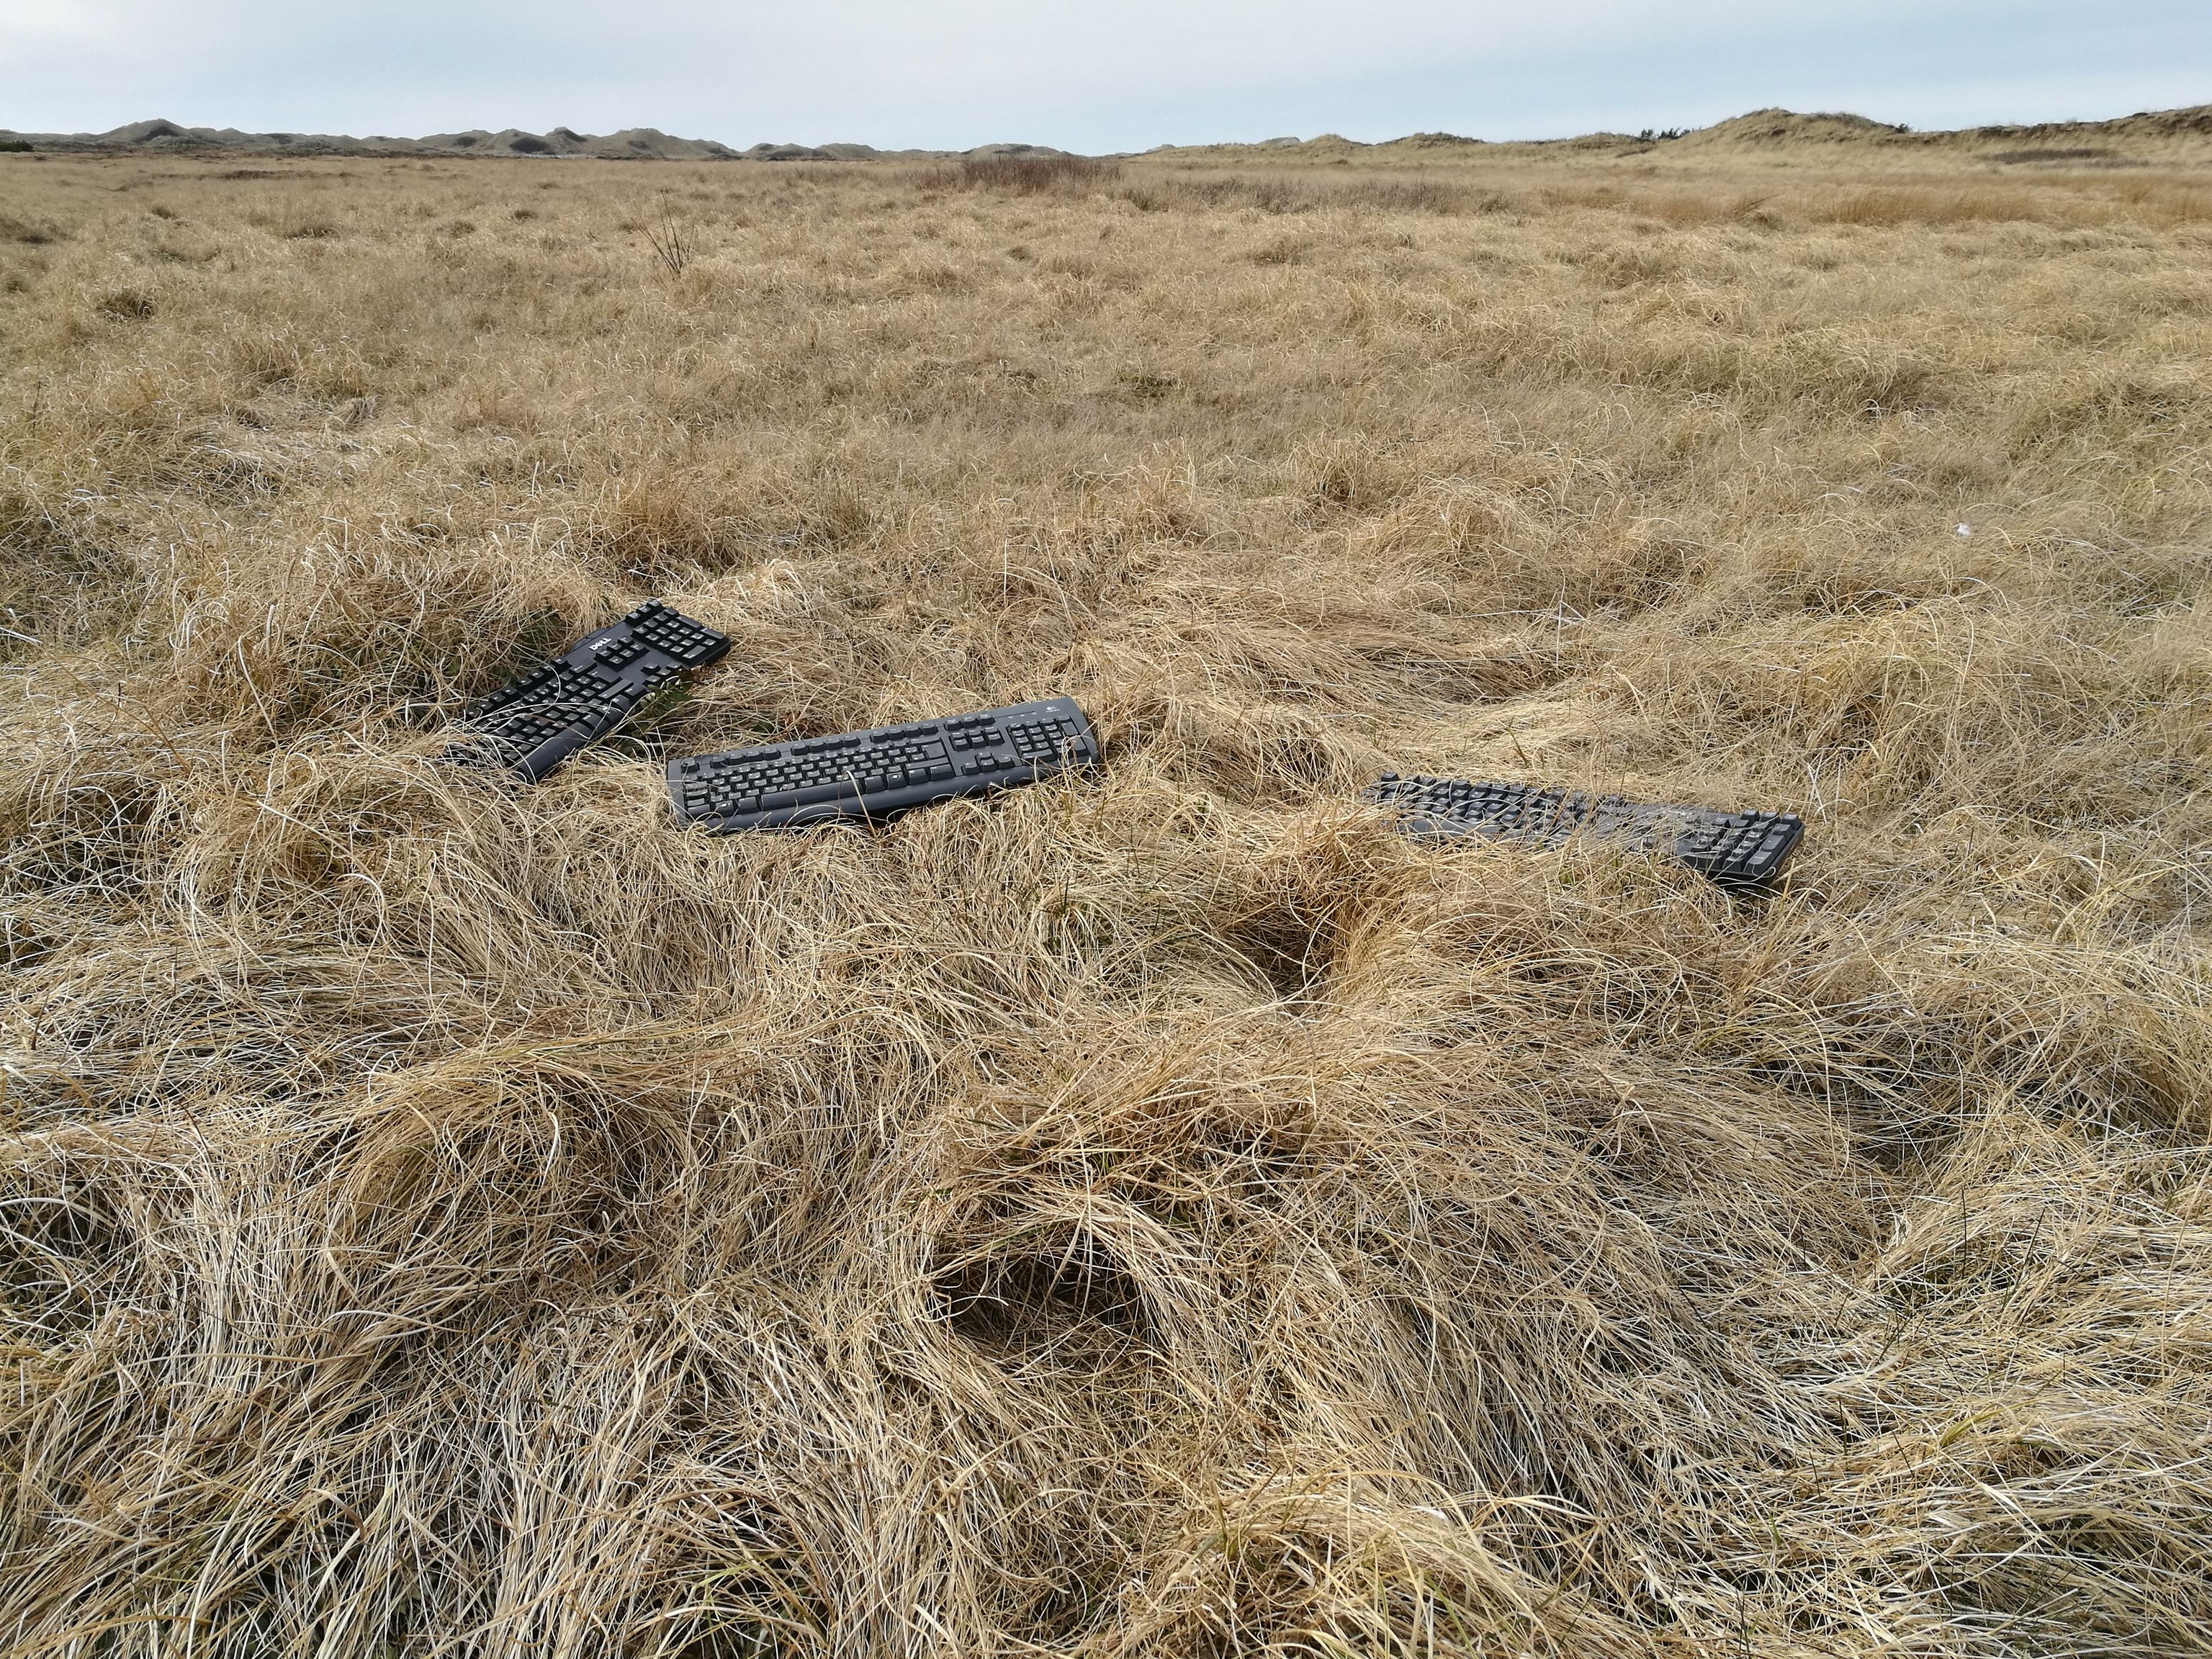 Three keyboards lying in dry grass. In the background are dunes.